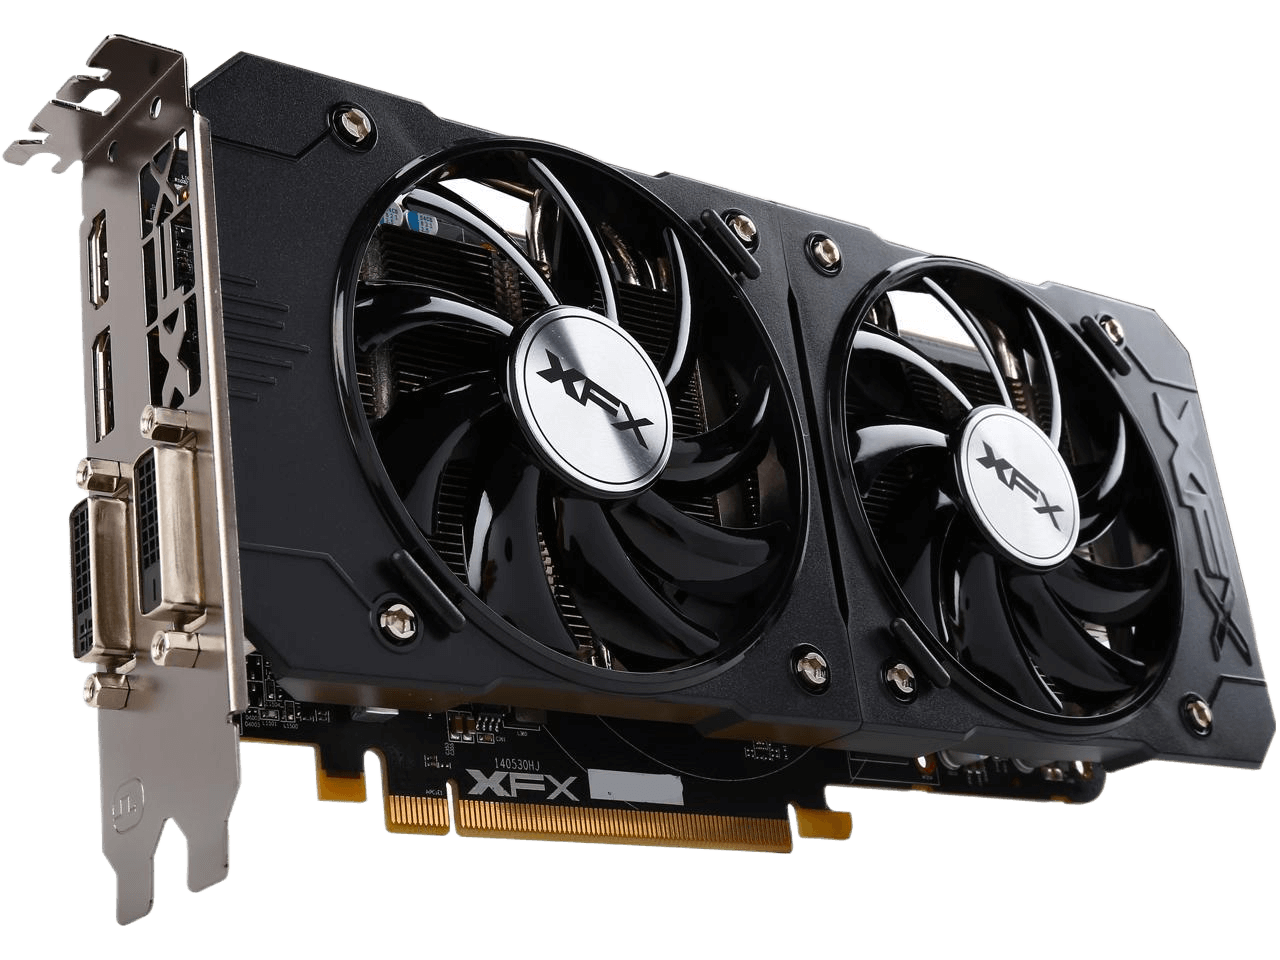 XFX Radeon R9 380X 4 GB GDDR5 990 MHz Core PCI Express 3.0 Dual Slot Space Required Graphics Card